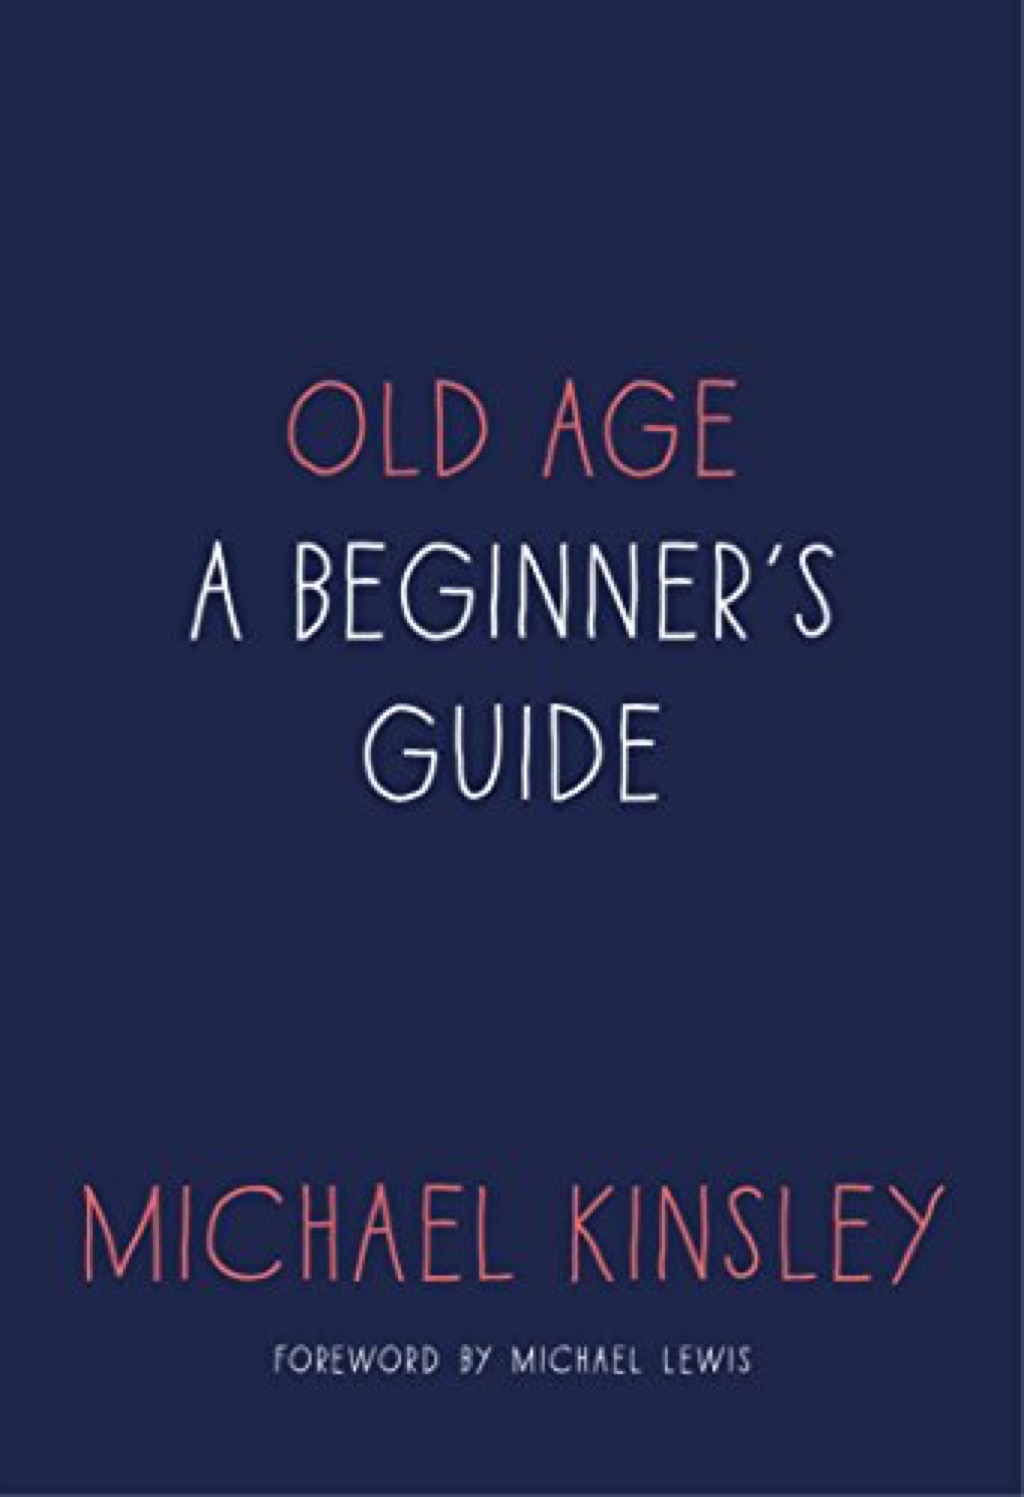 Old Age: A Beginner